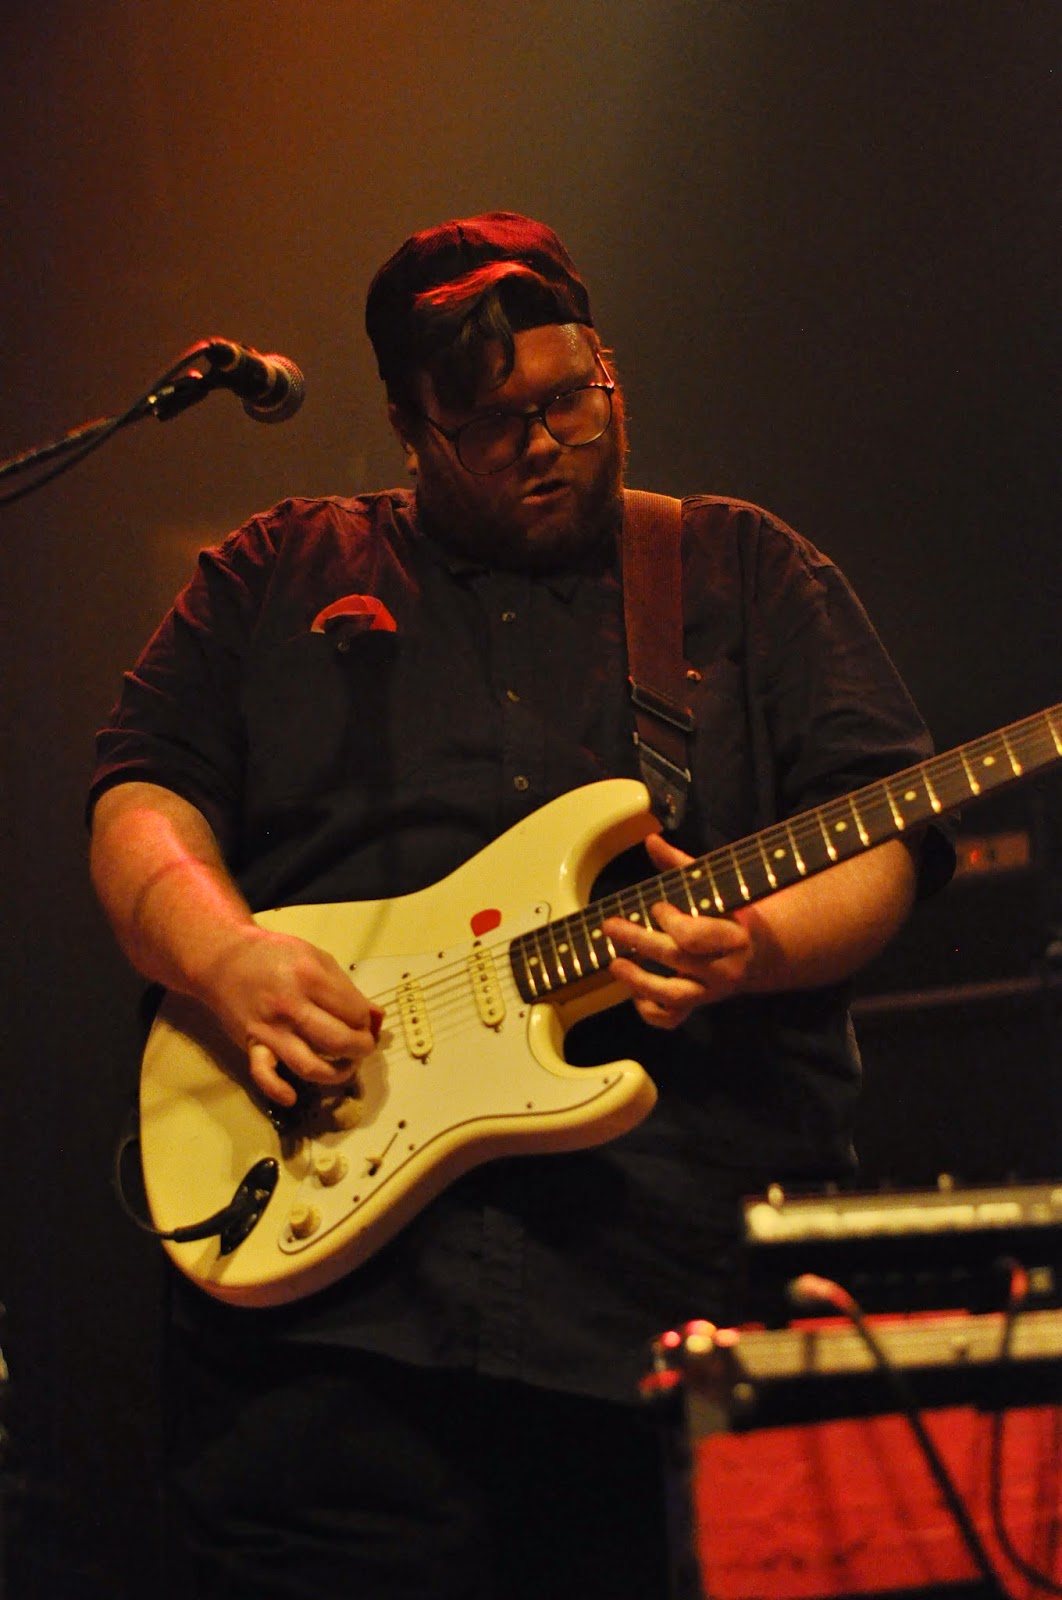 Paul Saulnier is the guitarist for PS I Love You.